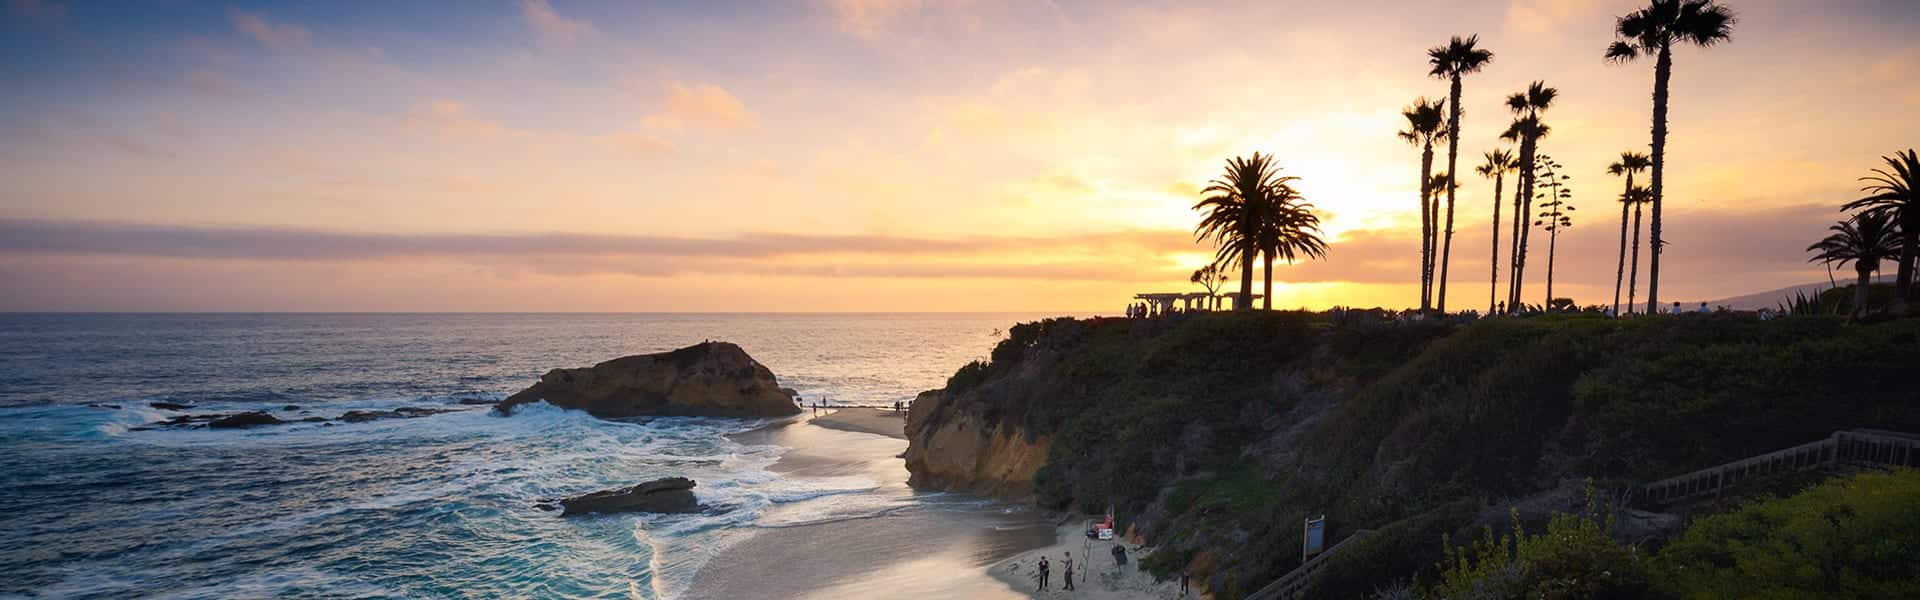 Vibrant, colorful picture of Orange County coast at sunset